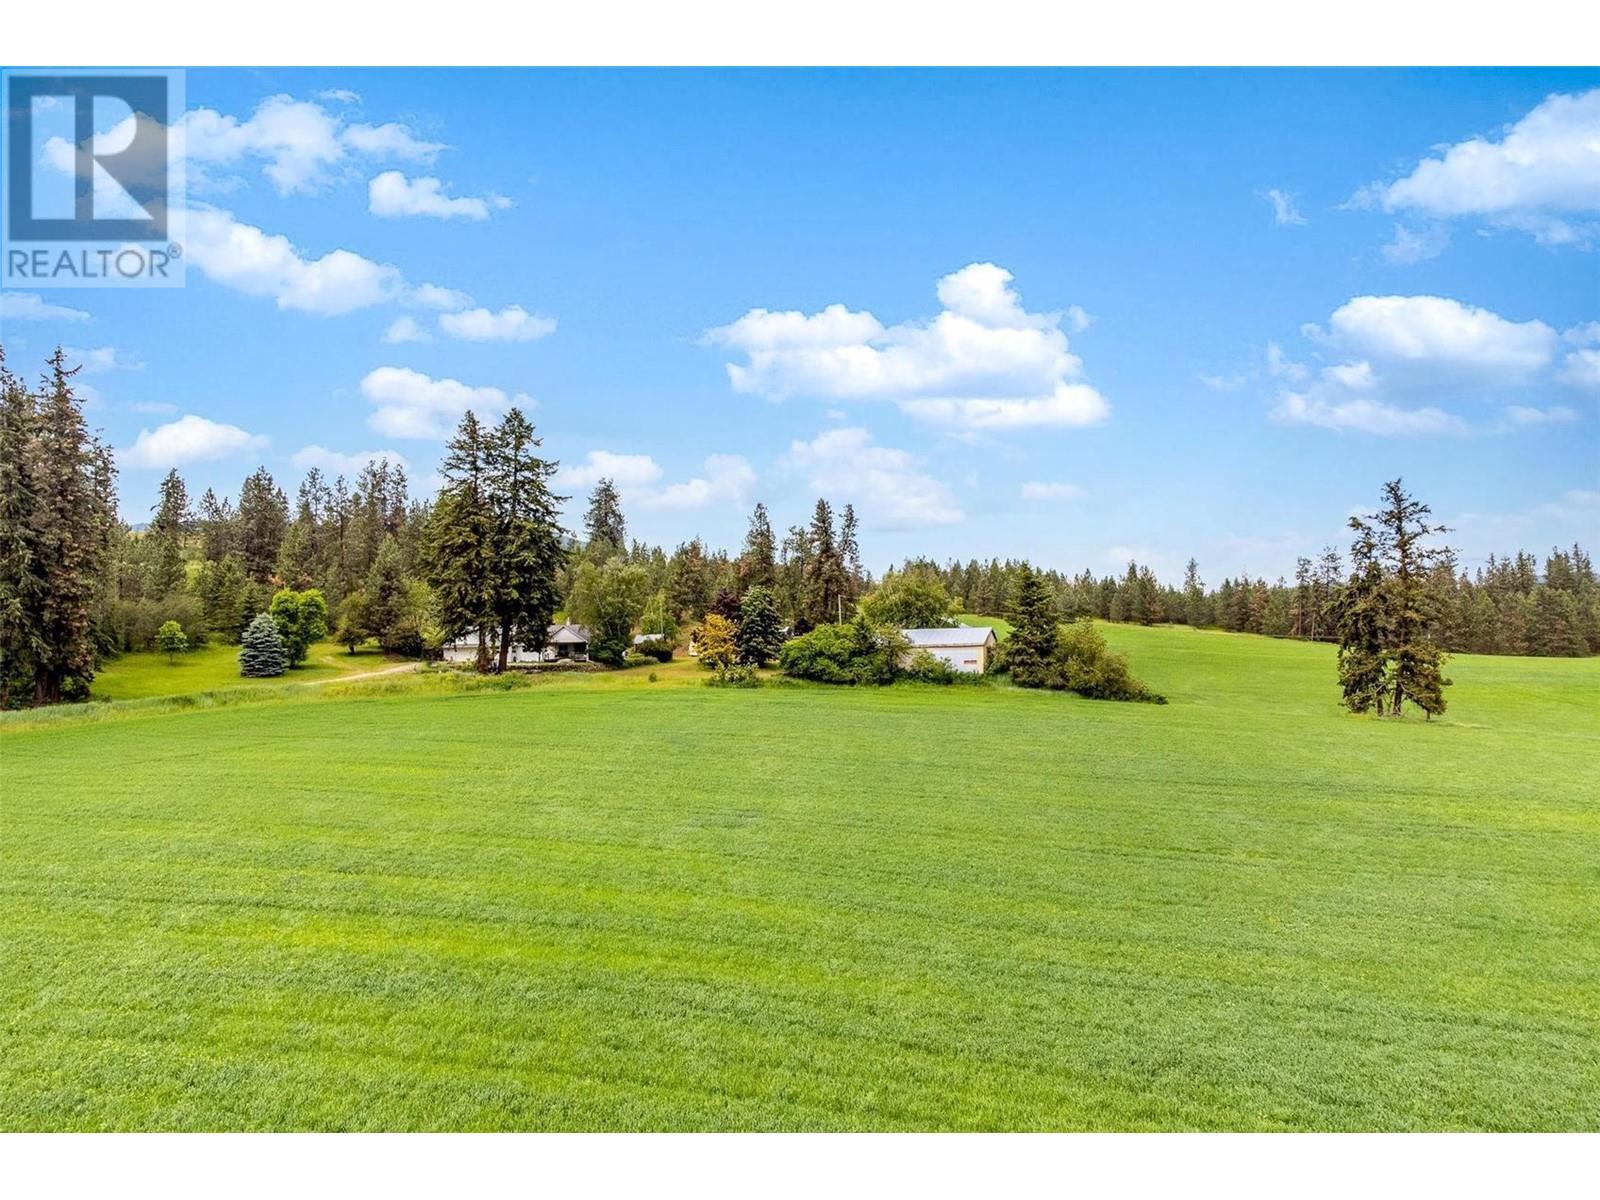 4602 Schubert Road located in Armstrong, British Columbia